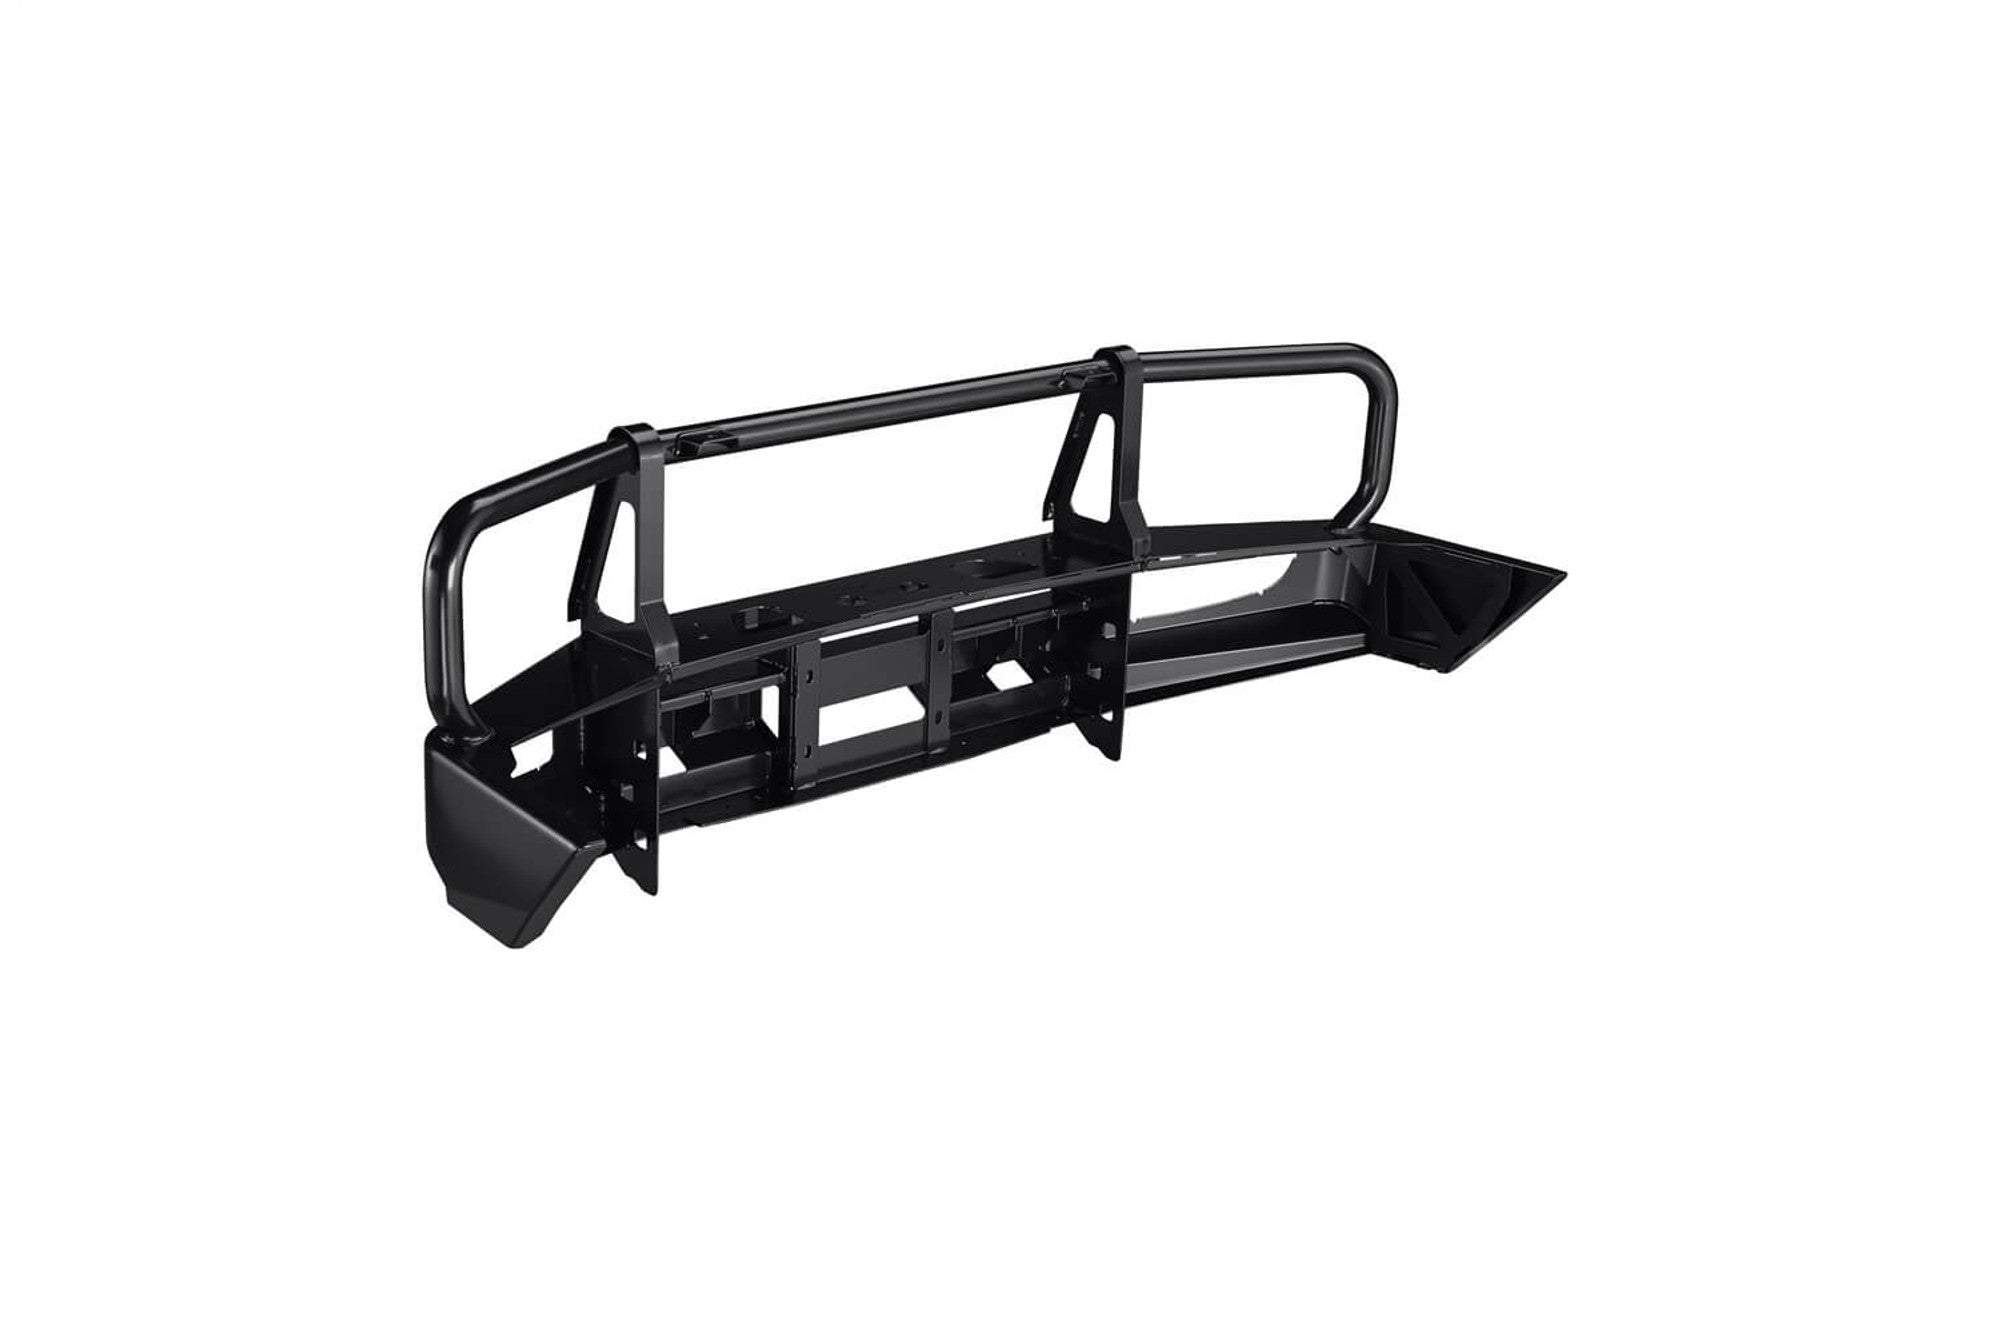 ARB Deluxe Front Bumper for 2005-2015 Xterra - 3438270 (Scratched)